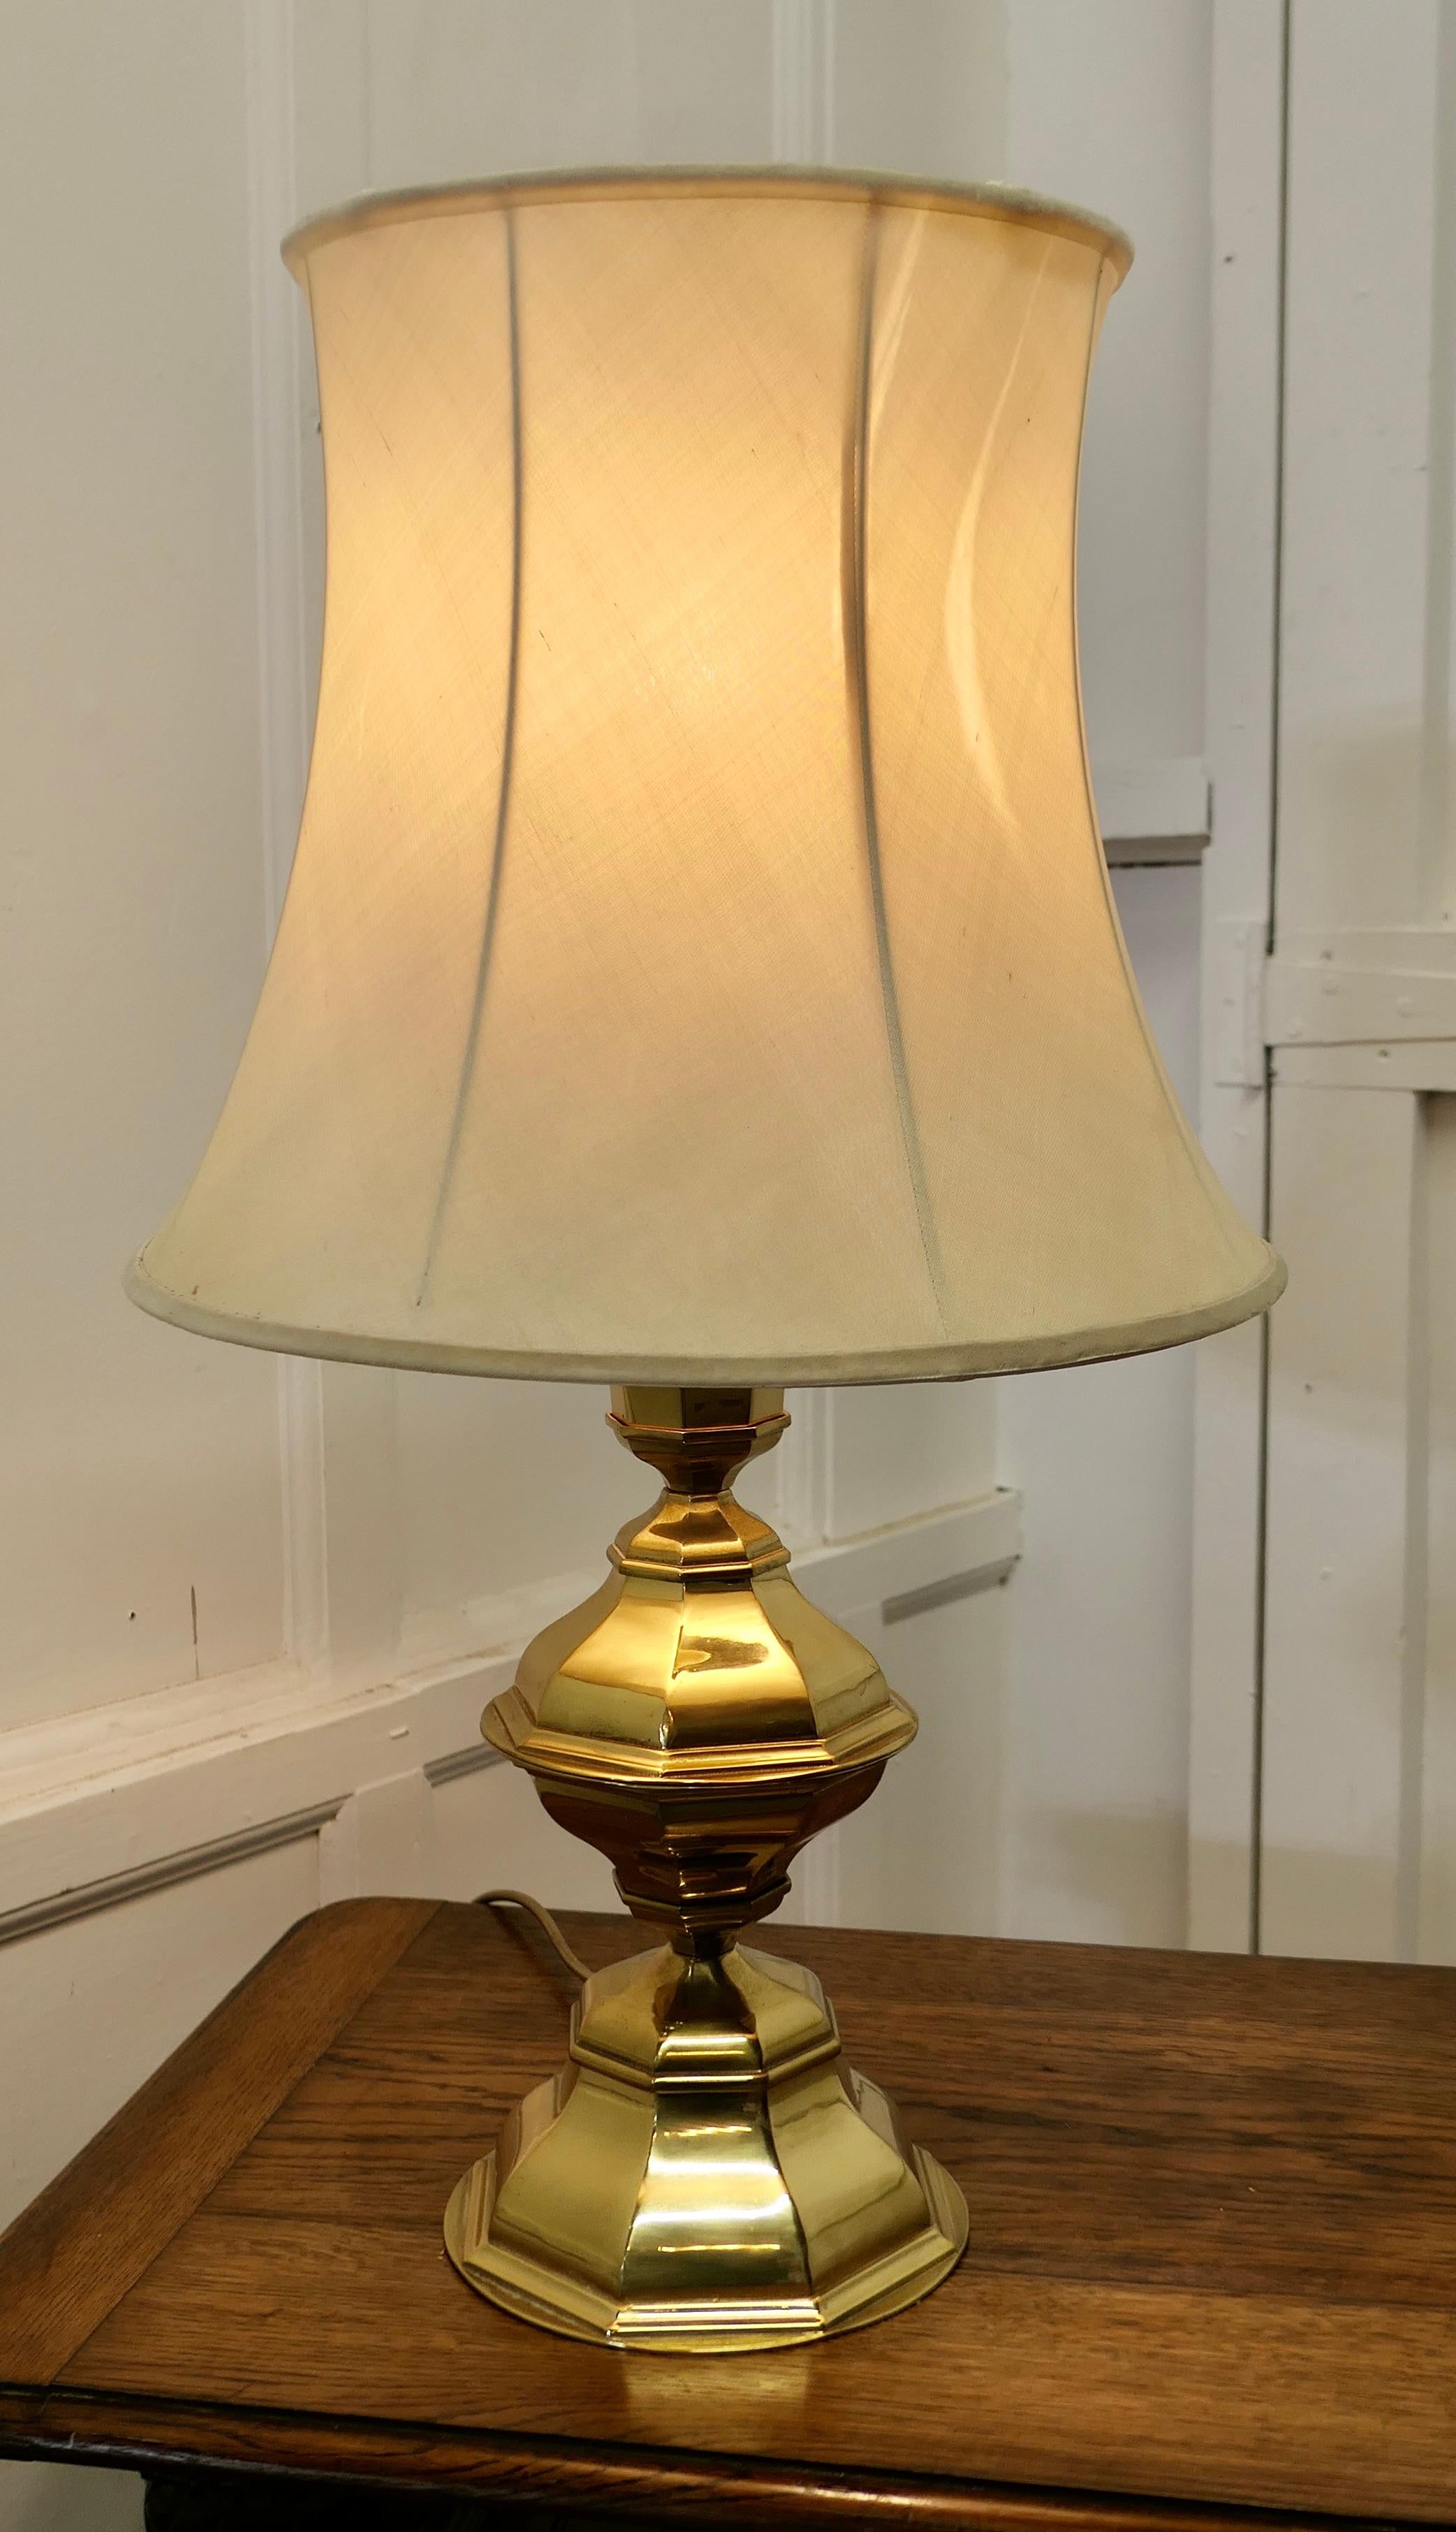 Large Bulbous octagonal brass table lamp 

This is an unusual Lamp it has a large brass 8 sided stepped base I have shown the lamp with it’s lampshade but this is somewhat worn now 
The lamp is fully wired and in good condition, a statement piece